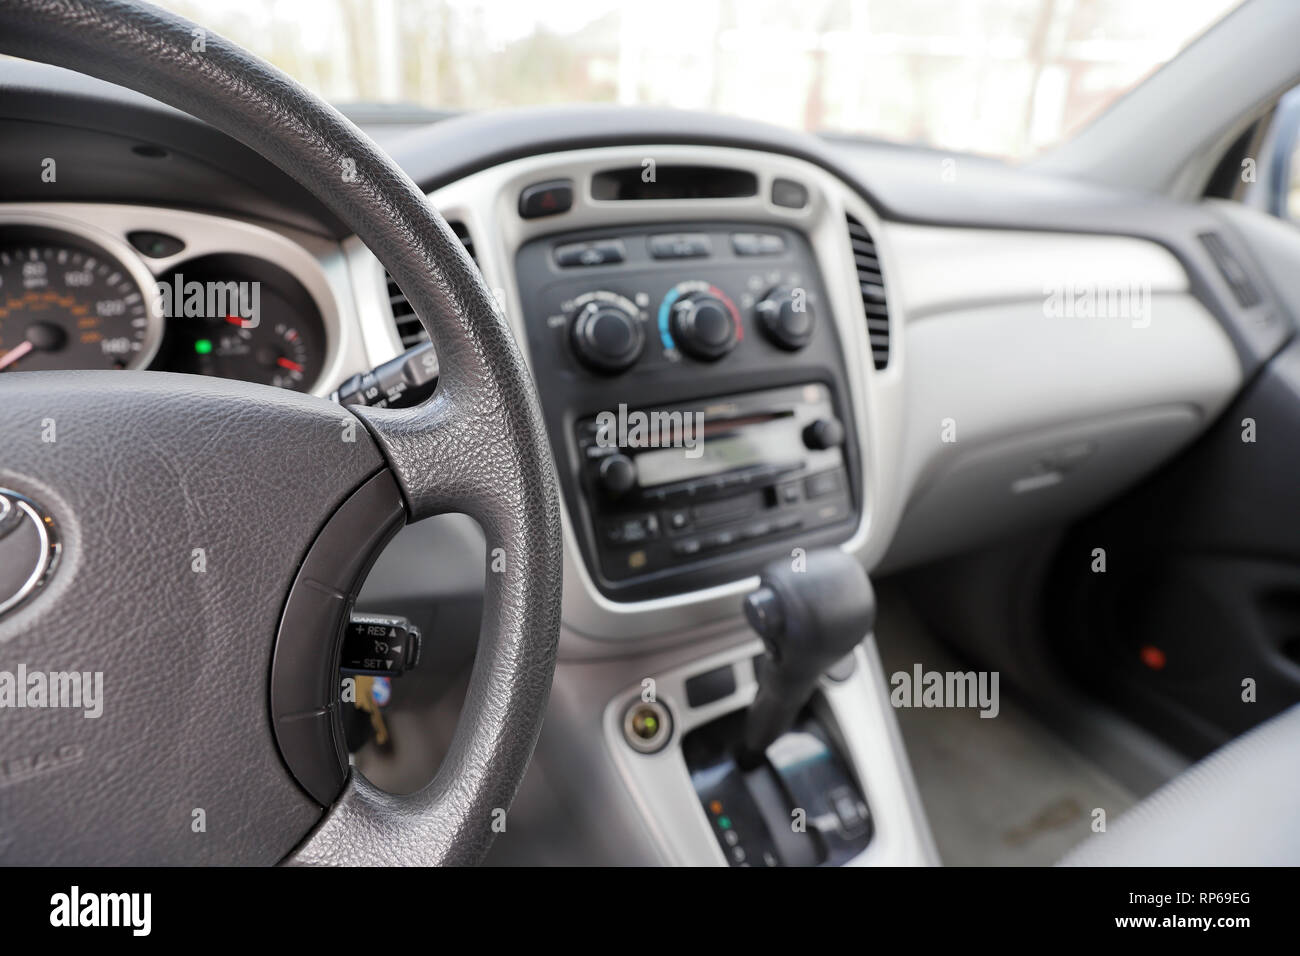 vehicle steering wheel, gear shift, radio and climate controls - interior, front, dashboard Stock Photo